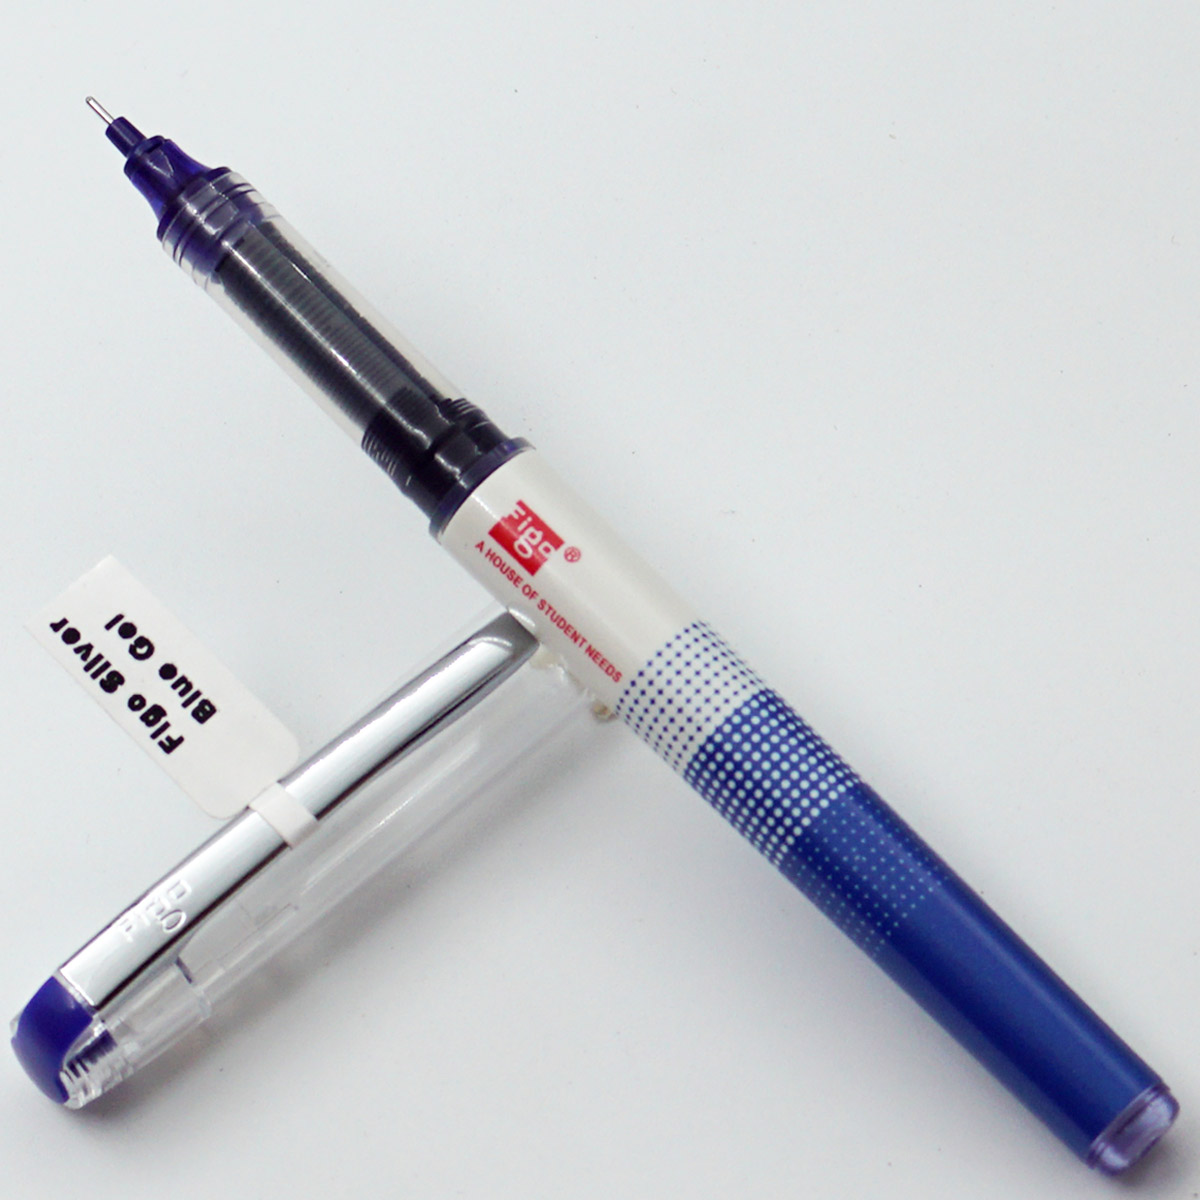 Figo Friends Silver Blue With White Color Body And Silver Clip Blue Writing Cap Type Roller Ball Pen SKU24560